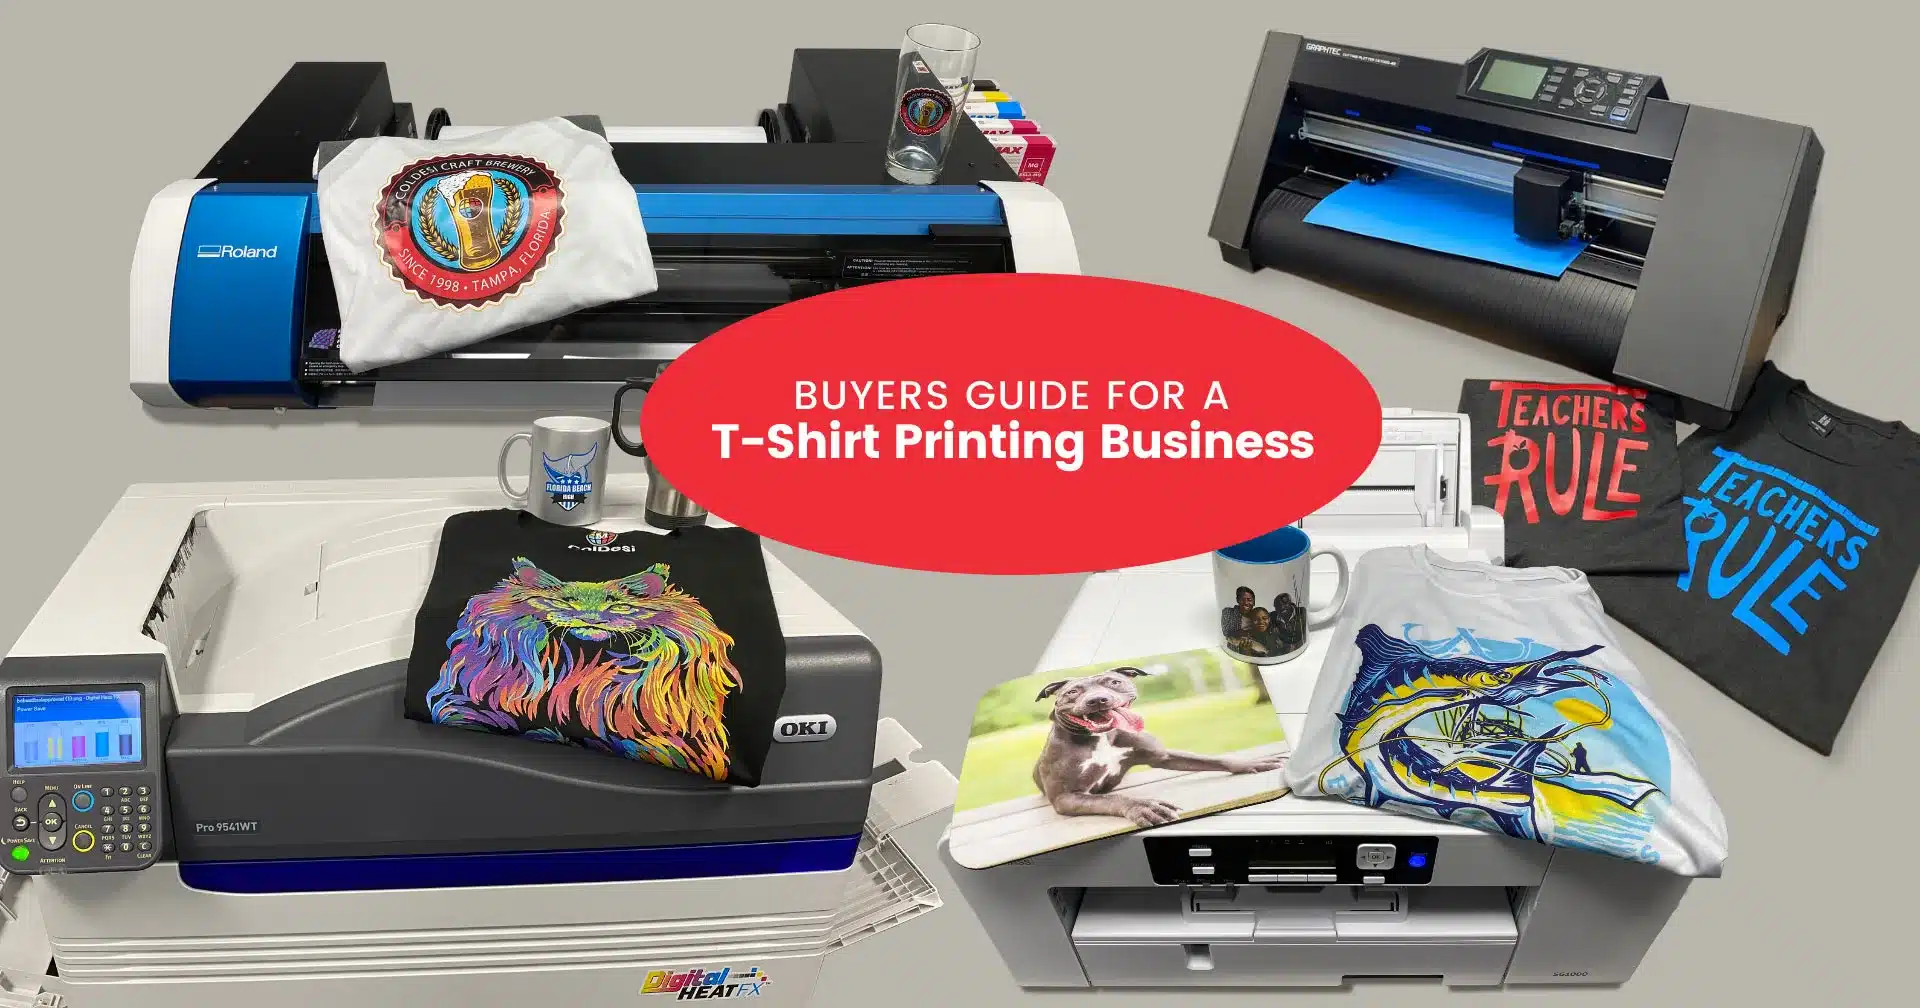 Buyers Guide for a T-shirt Printing Business (or any Customization